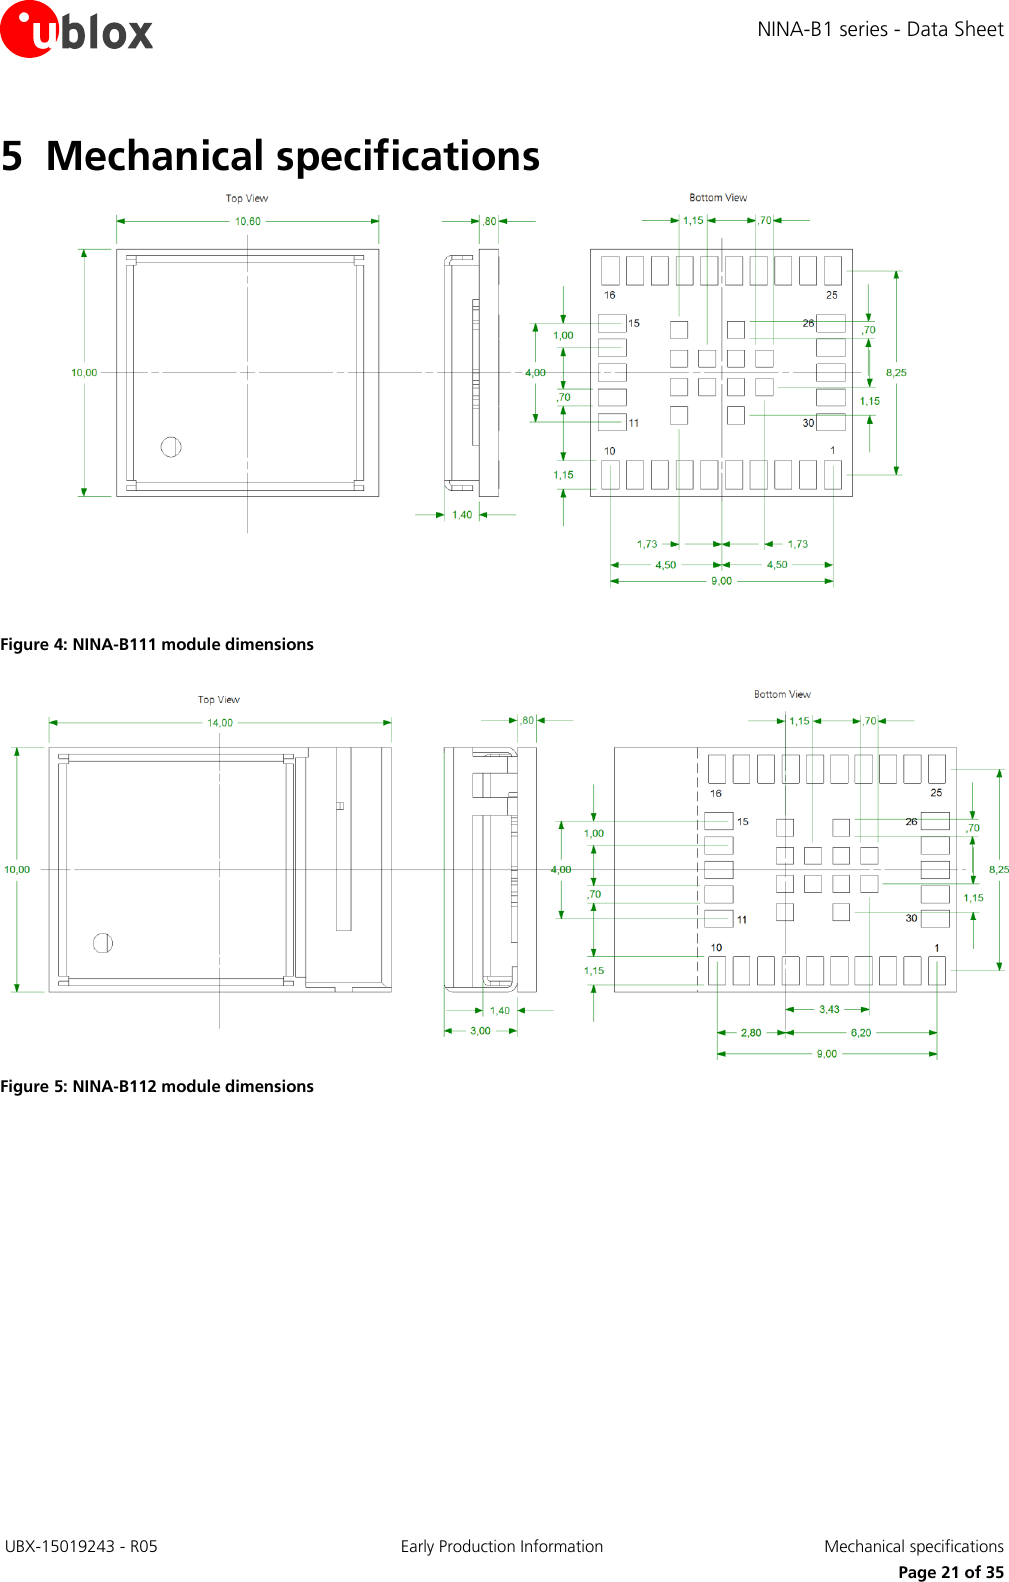 NINA-B1 series - Data Sheet  UBX-15019243 - R05 Early Production Information  Mechanical specifications     Page 21 of 35 5 Mechanical specifications   Figure 4: NINA-B111 module dimensions   Figure 5: NINA-B112 module dimensions  